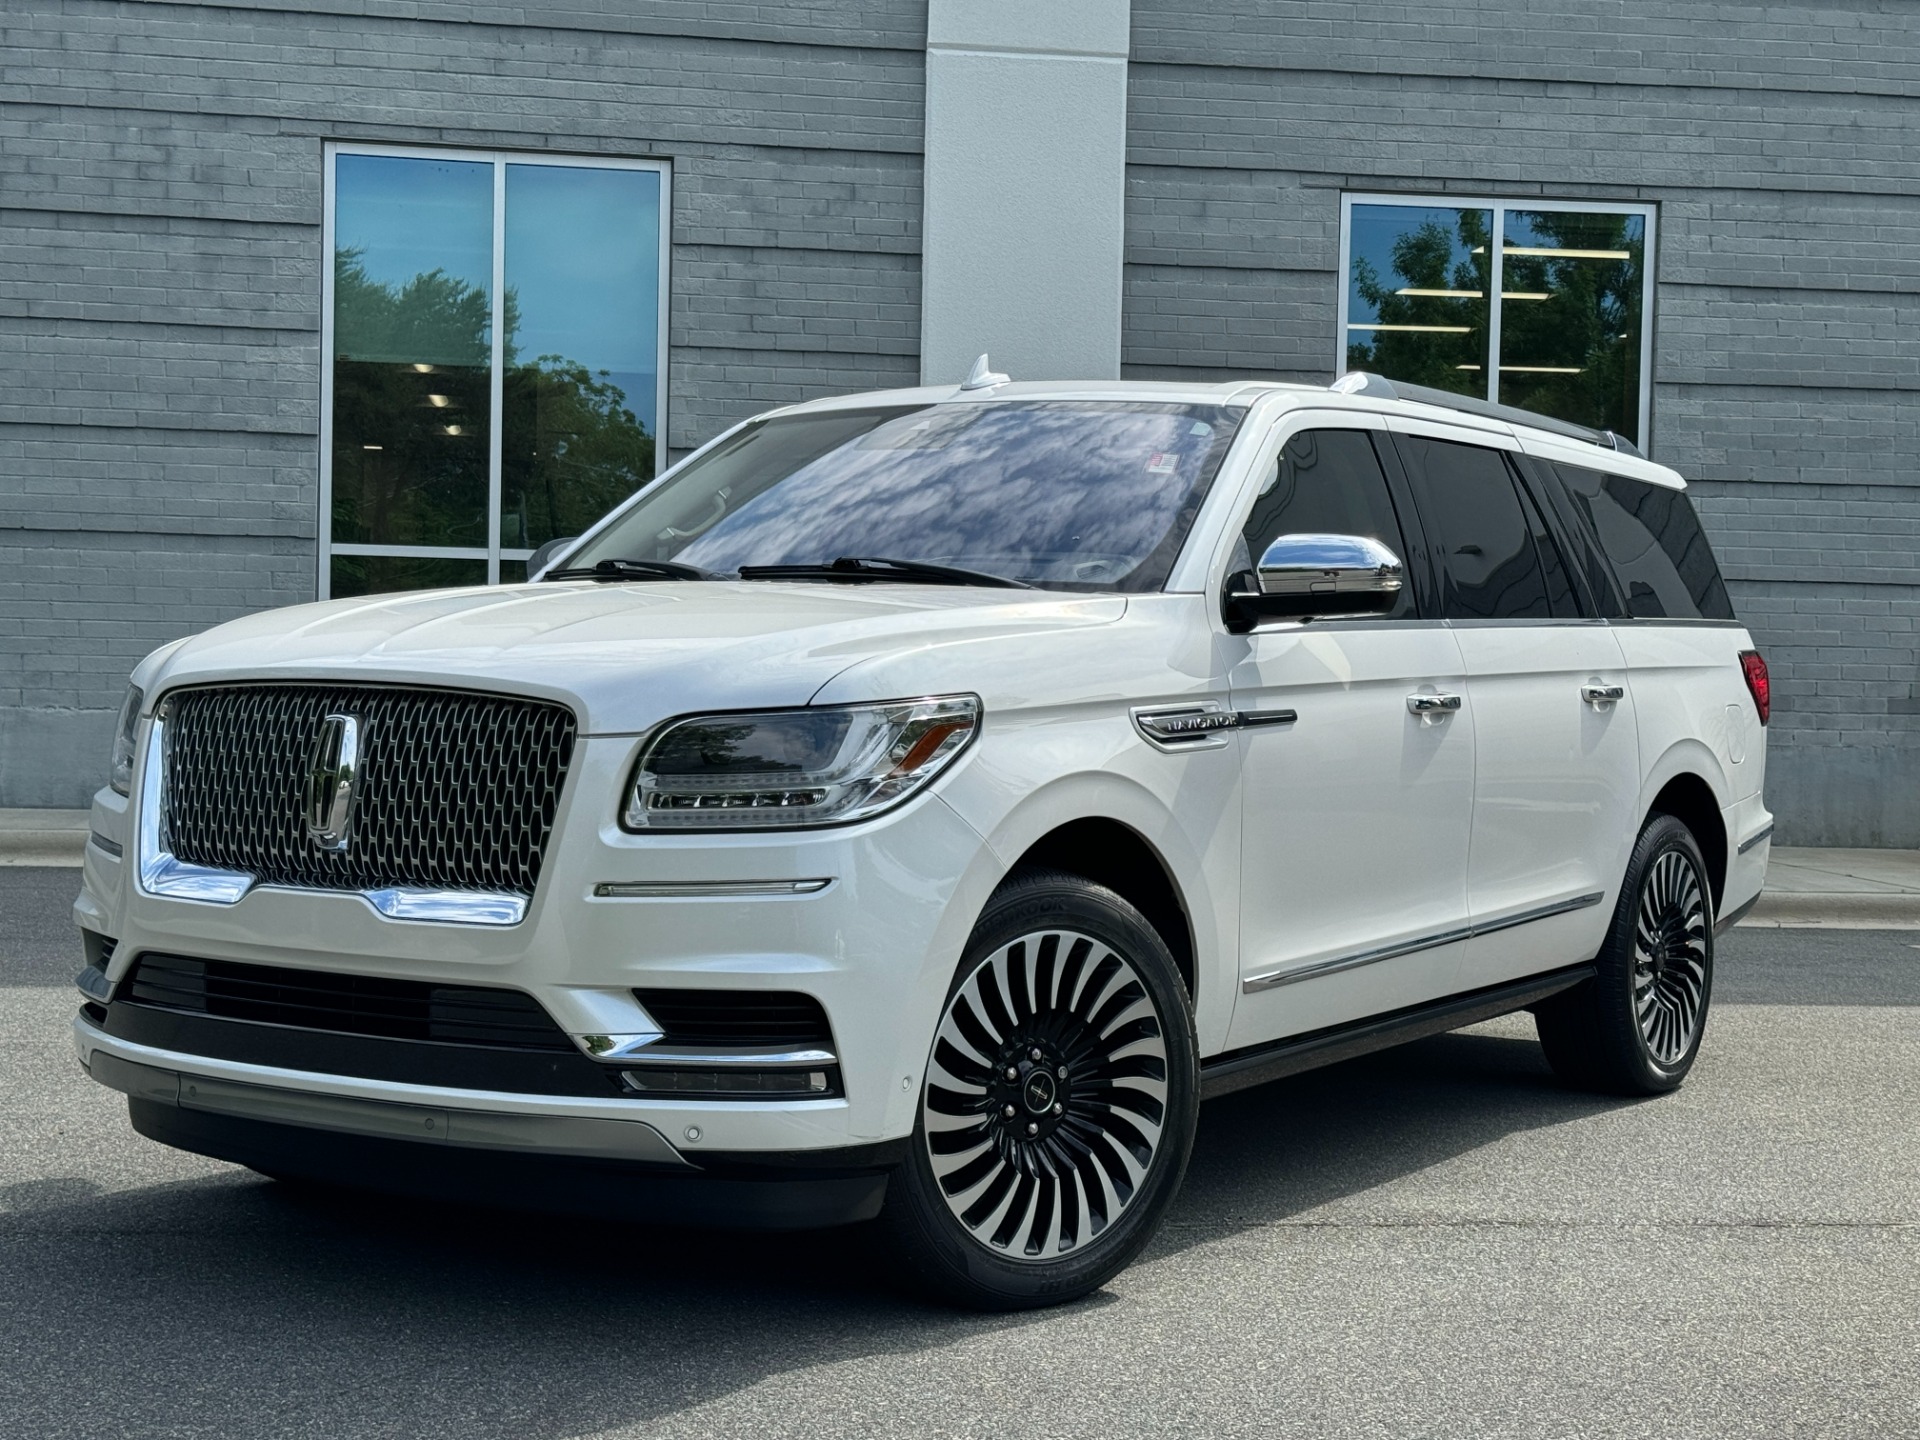 Used 2019 Lincoln NAVIGATOR L BLACK LABEL 4X4 / 3.5L V6 10-SPD / 7-PASS / NAV / PANO-ROOF / REARVIEW for sale Sold at Formula Imports in Charlotte NC 28227 1